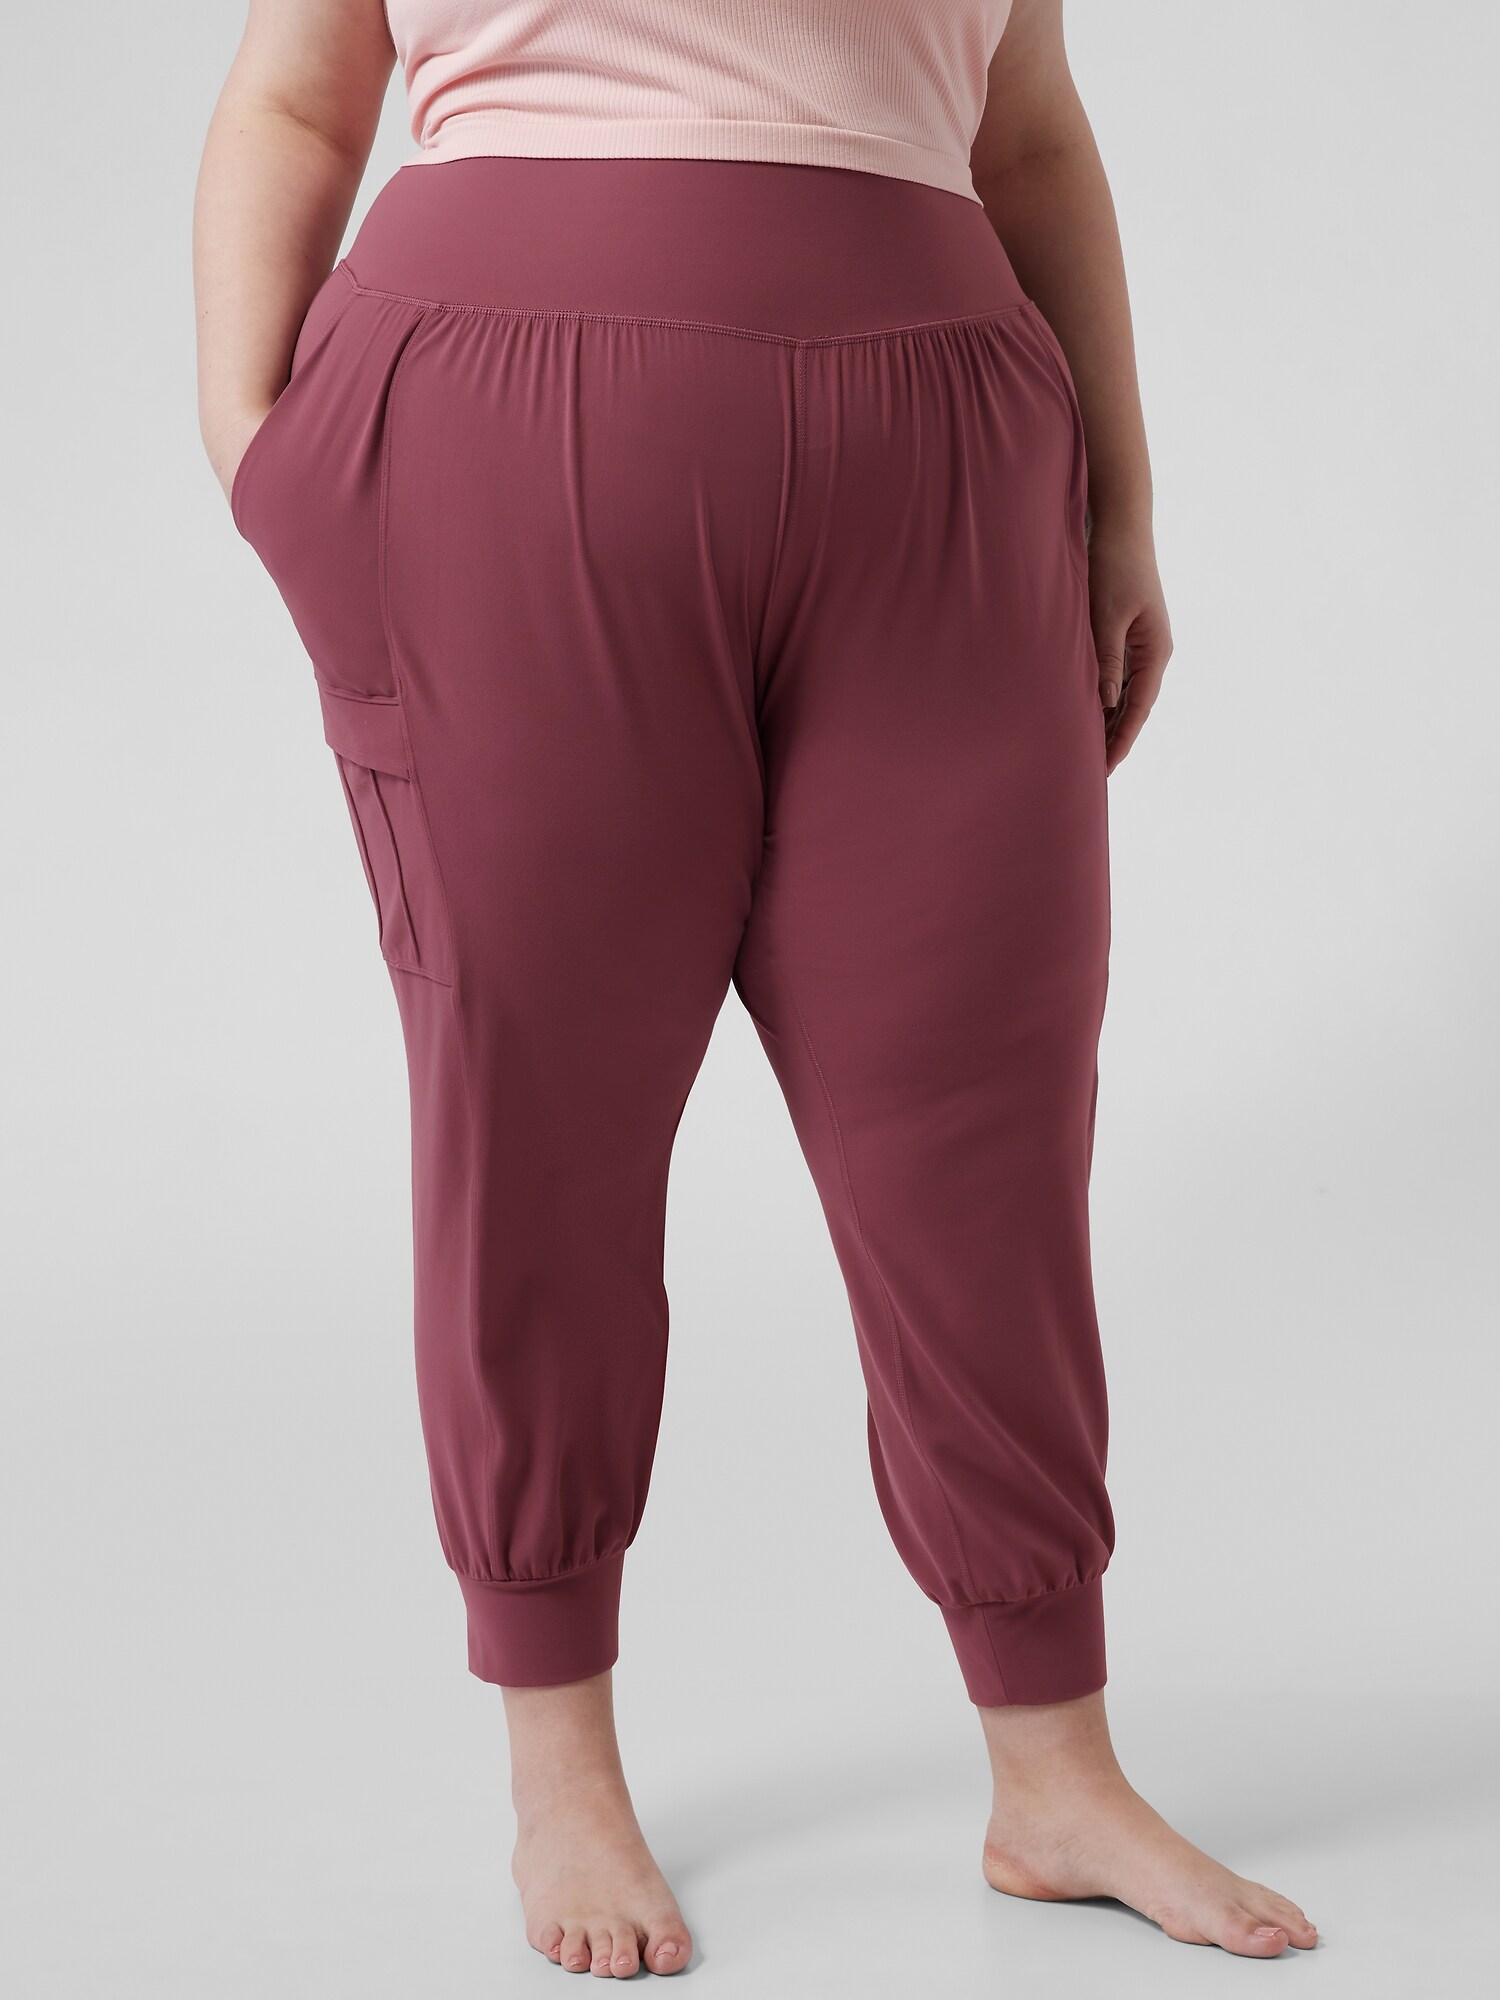 Athleta $109.00 Vienna Cargo Pant, Size 0 Orchid Pink with Black Pocket  Snaps